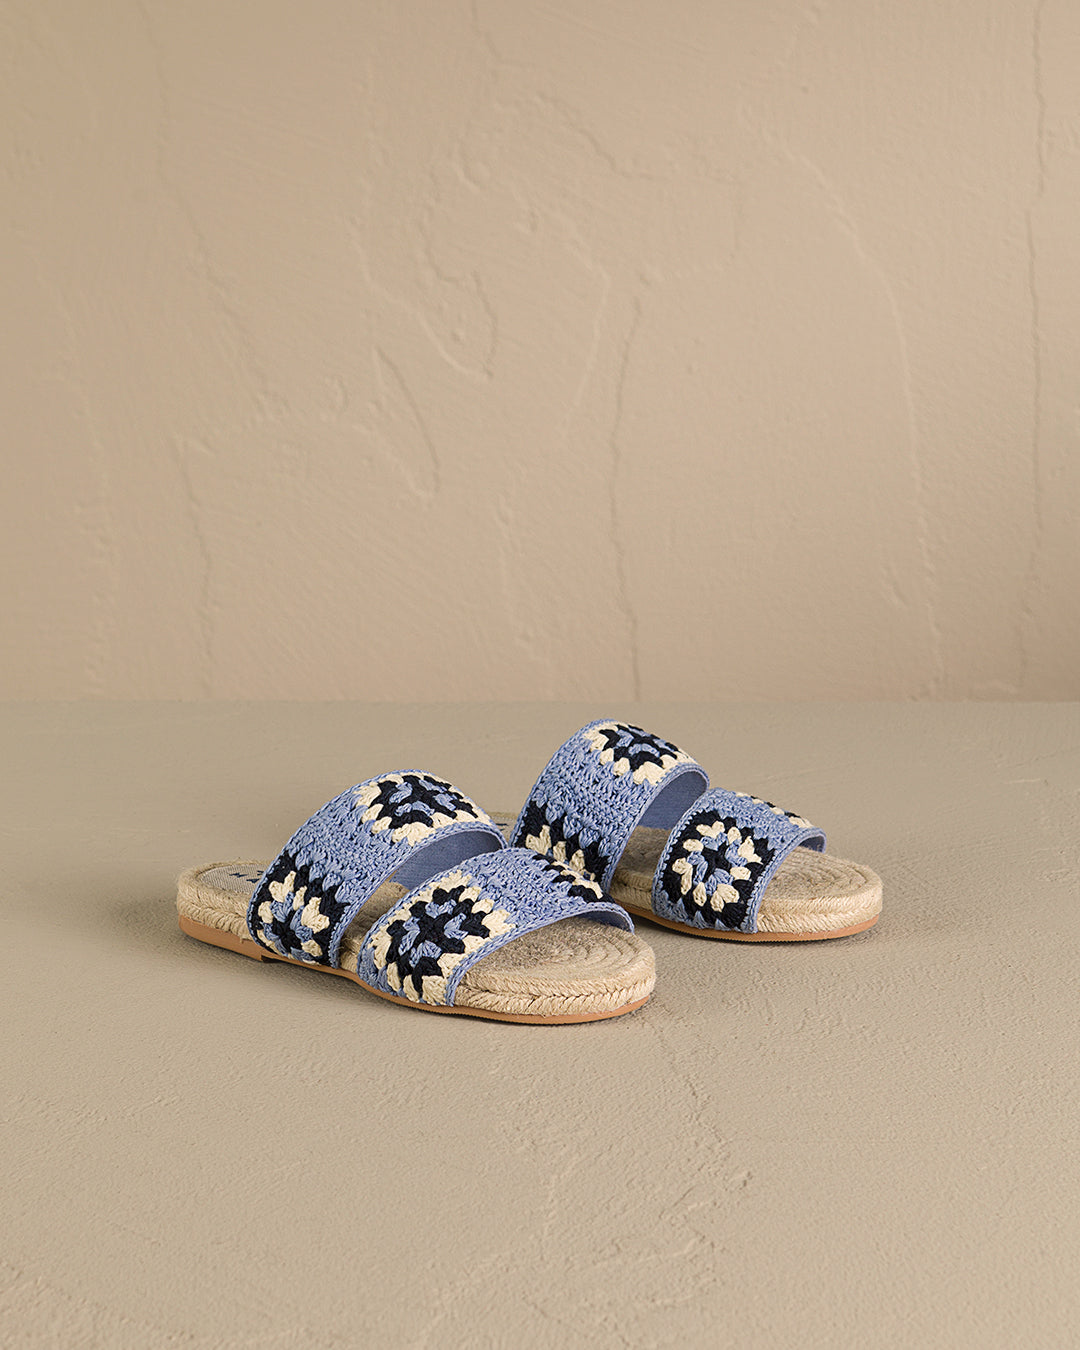 Cotton Crochet Two Bands|Jute Sandals - Indigo And Navy Blue